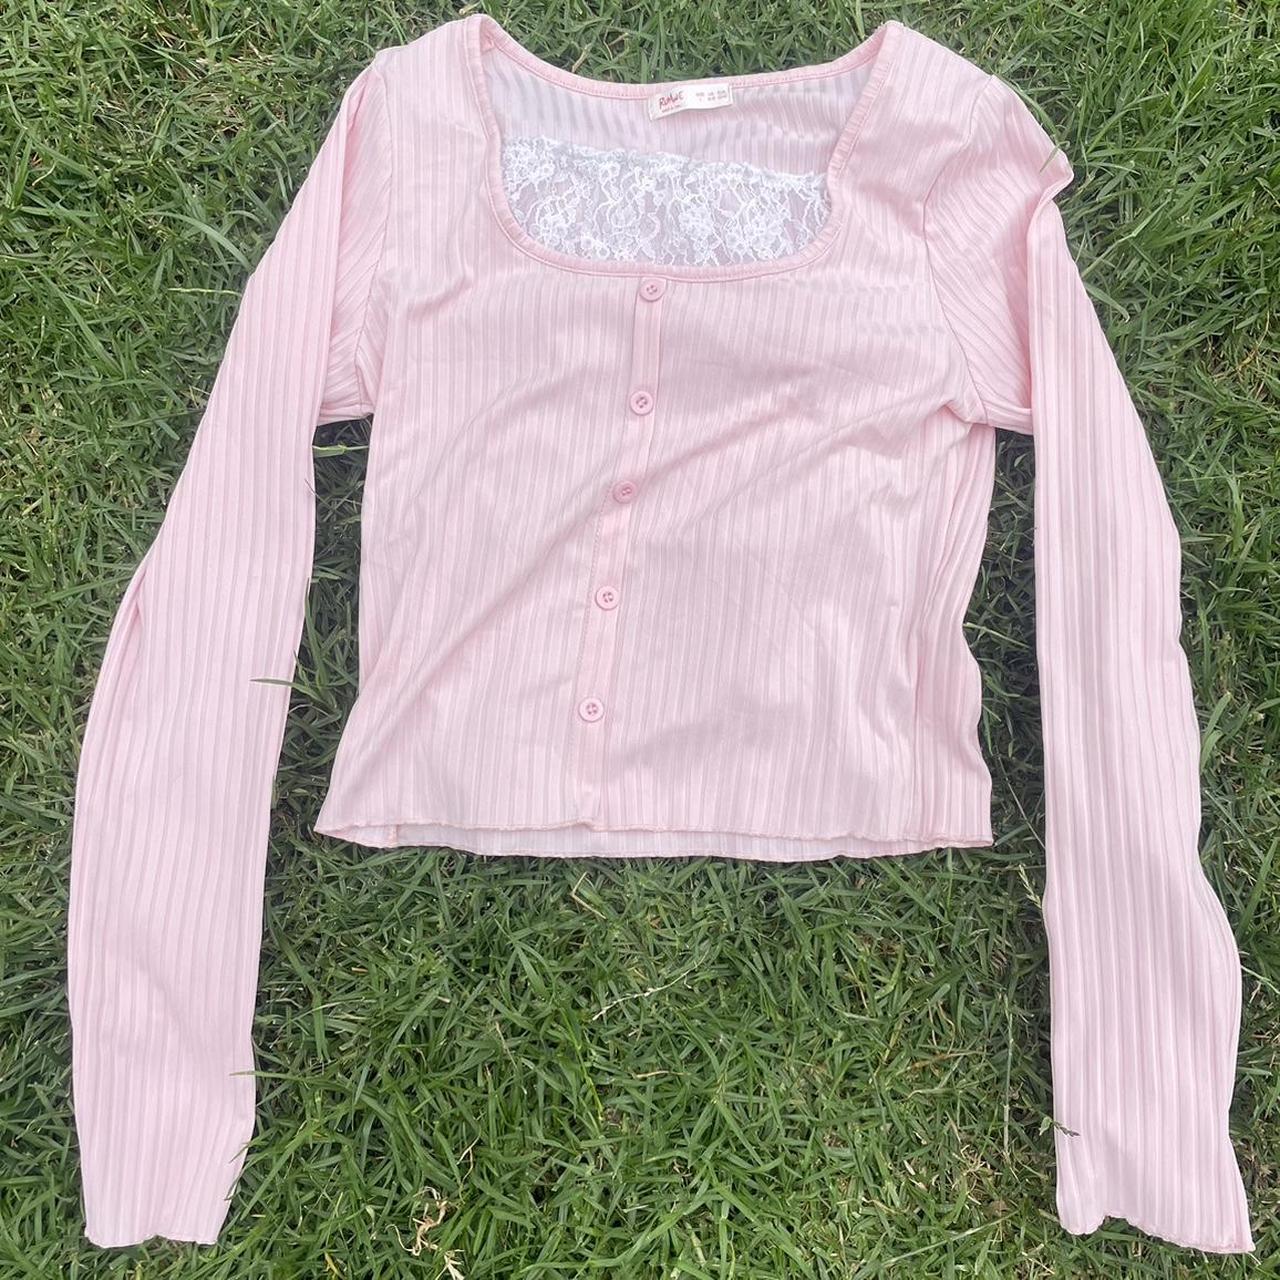 Romwe Women's Pink and White Jumper